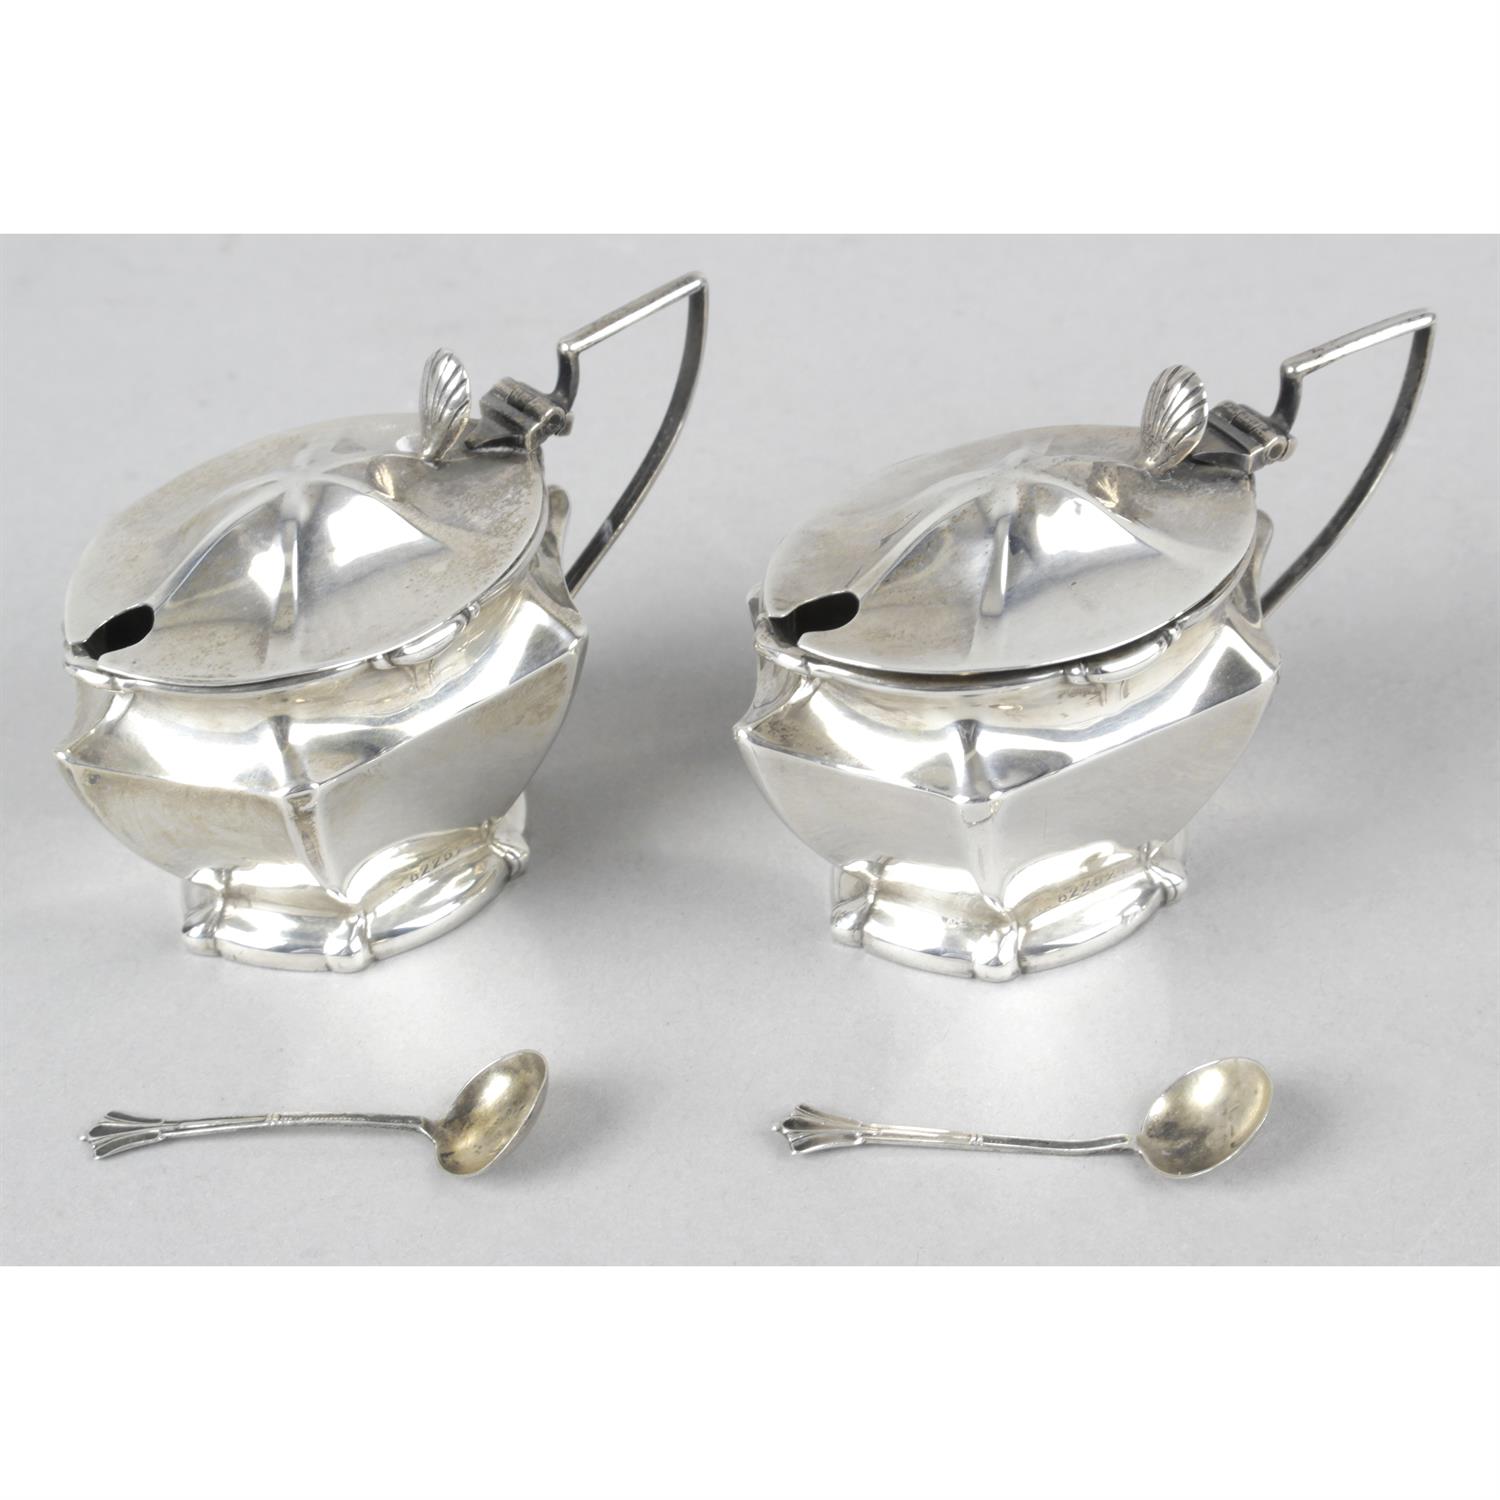 Two silver mustard pots (missing liners), a sugar bowl and cream jug (a.f) and two Italian beakers;